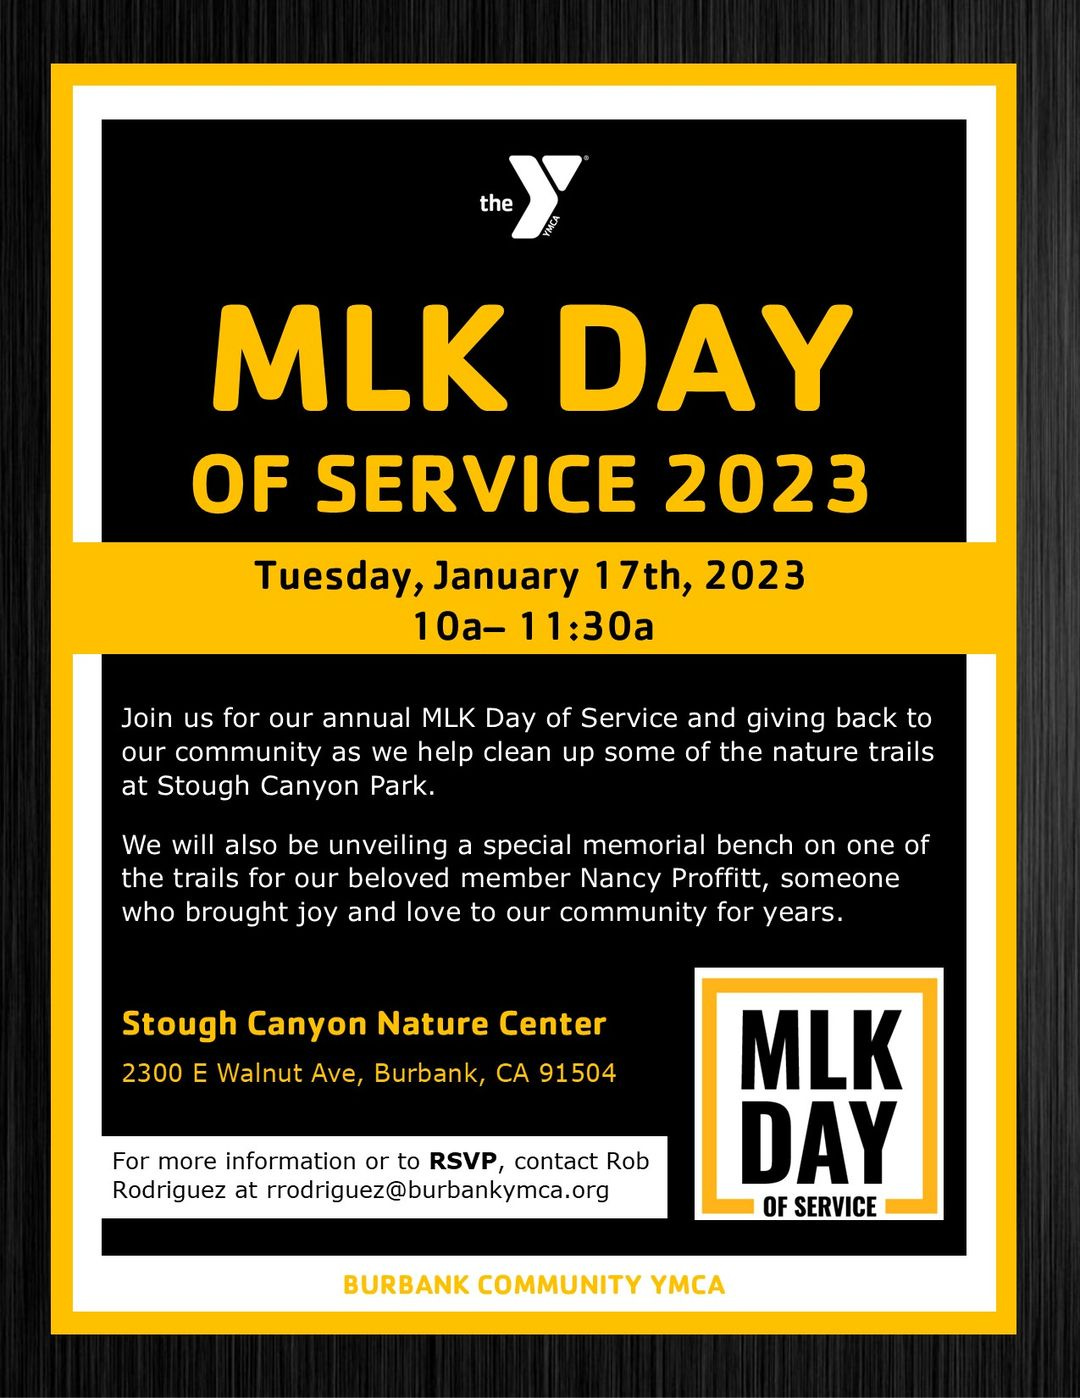 May be an image of text that says 'the MLK DAY OF SERVICE 2023 Tuesday, January 17th, 2023 10a- 11:30a Join us for our annual MLK Day of Service and giving back to our community as we help clean up some of the nature trails at Stough Canyon Park. We will also be unveiling a special memorial bench on one of the trails for our beloved member Nancy Proffitt, someone who brought joy and love to our community for years. Stough Canyon Nature Center 2300 E Walnut Ave, Burbank, CA 91504 For more information or RSVP, contact Rob Rodriguez atrrodriguez@burbankymca.org MLK DAY OF SERVICE BURBANK COMMUNITY YMCA'